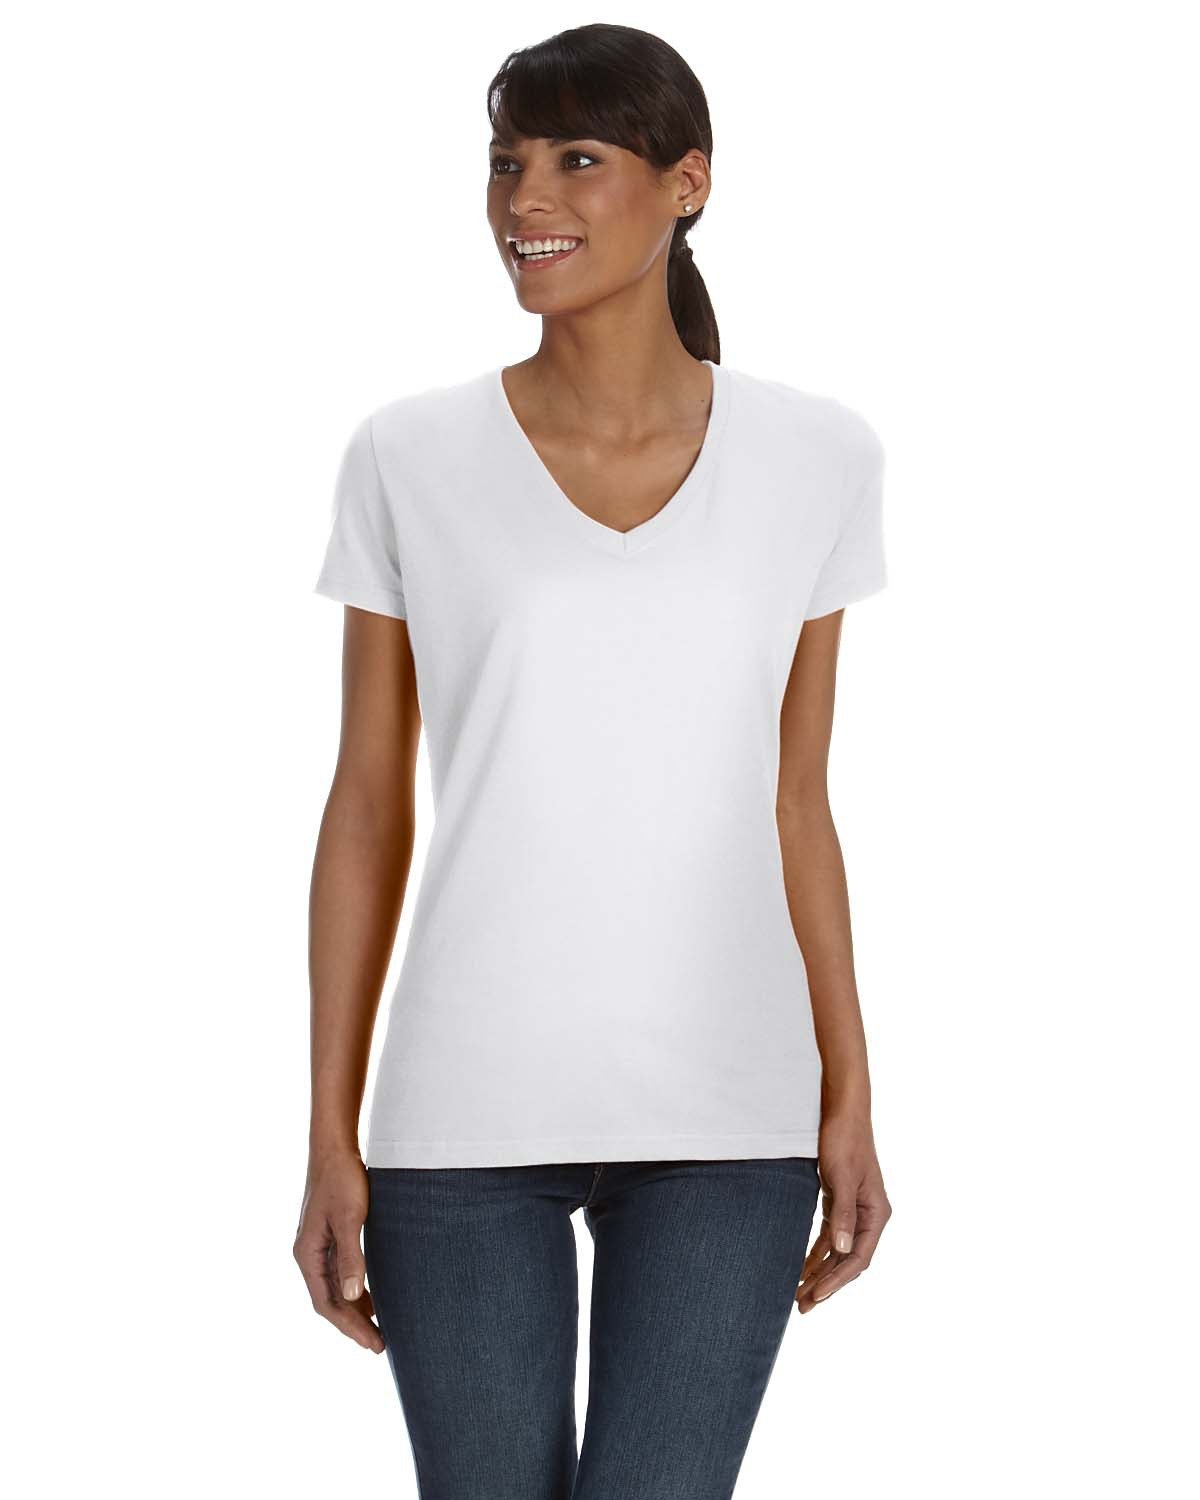 Fruit of the Loom Ladies' HD Cotton™ V-Neck T-Shirt WHITE 